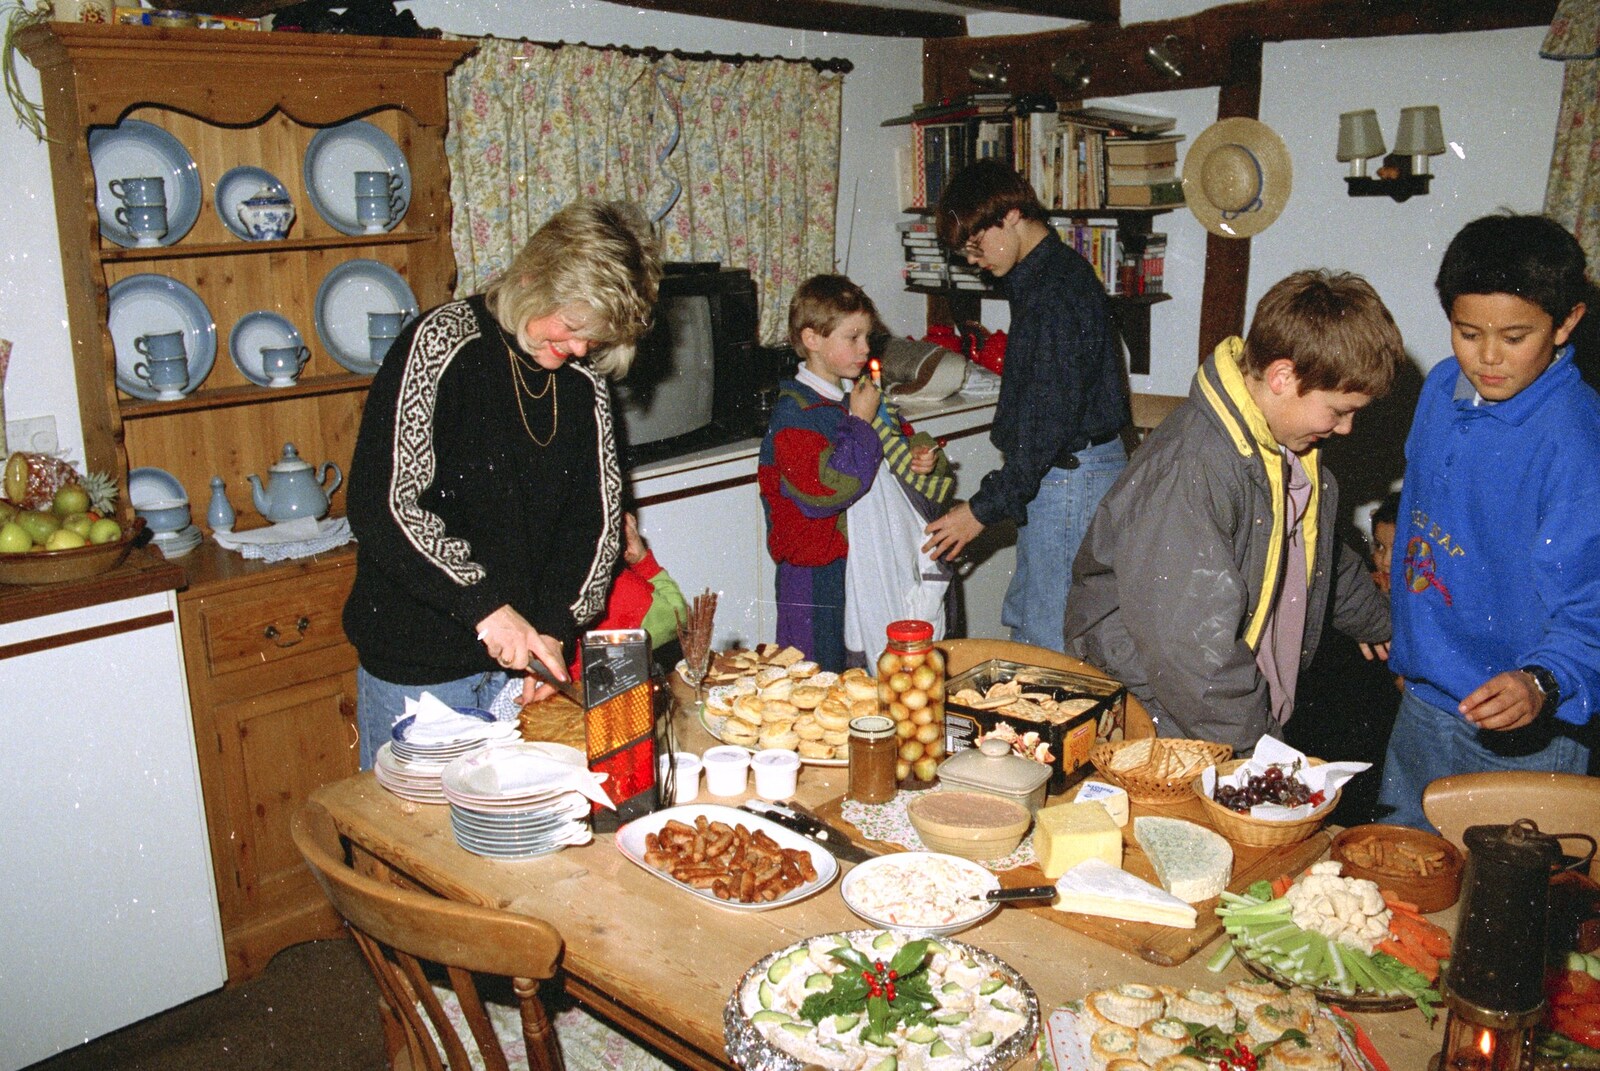 Sheila's pile of food from Christmas in Devon and Stuston - 25th December 1991